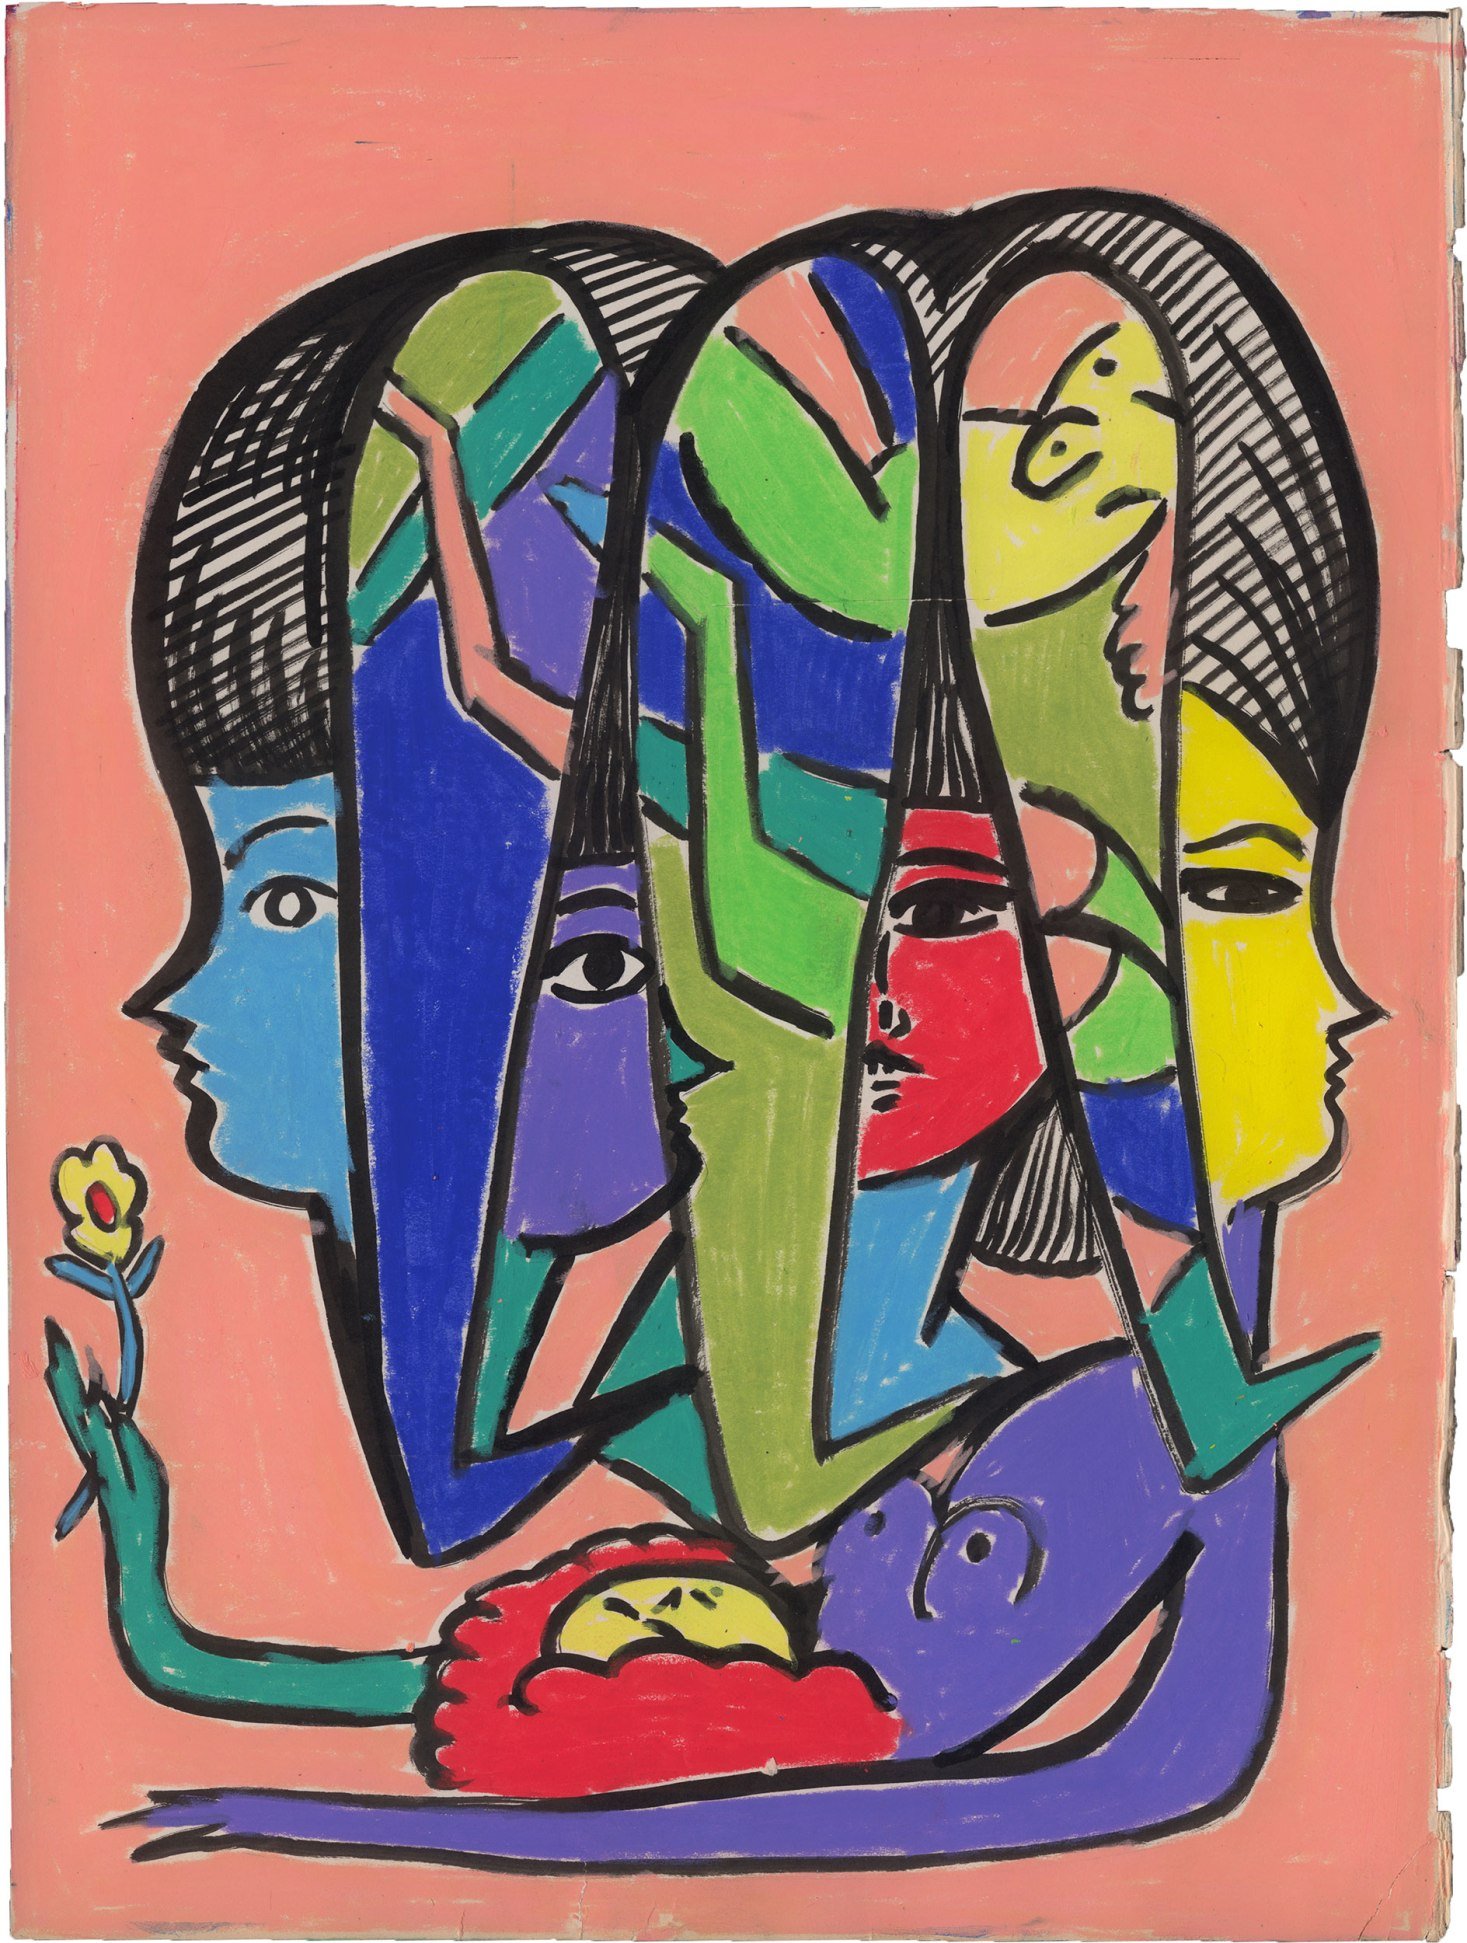 Group work. Ink, wax pastel on paper. 35 x 26.6cm. 2018. 600€.